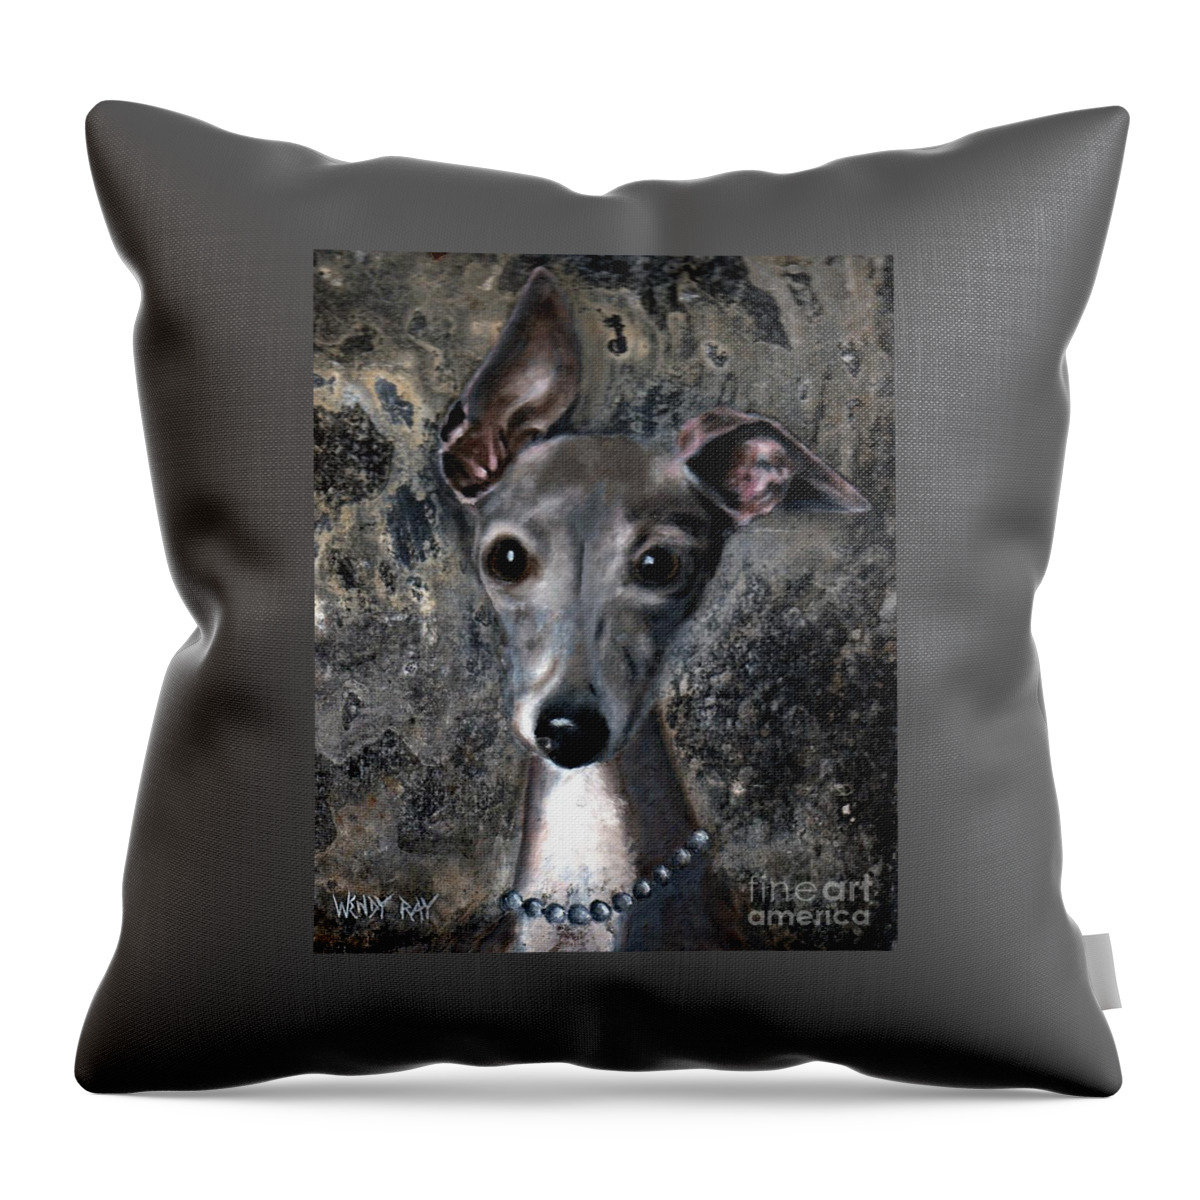 Italian Greyhound Throw Pillow featuring the painting Sophie by Wendy Ray